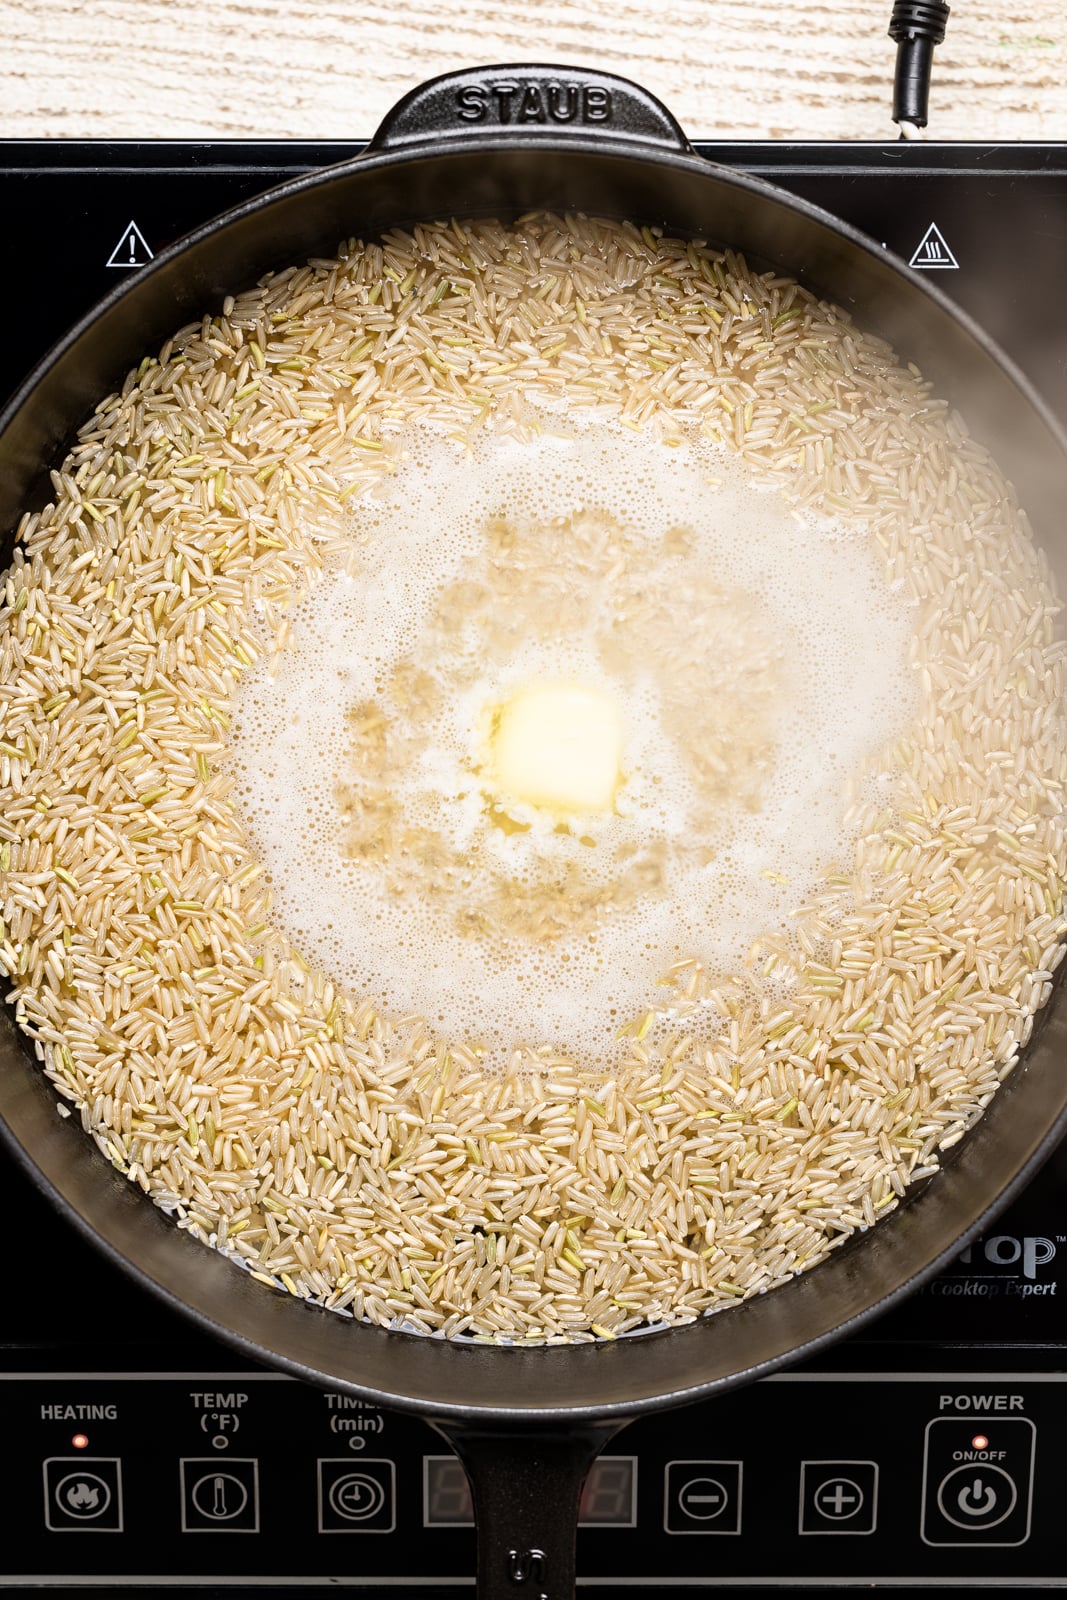 Rice being boiled on a stovetop.